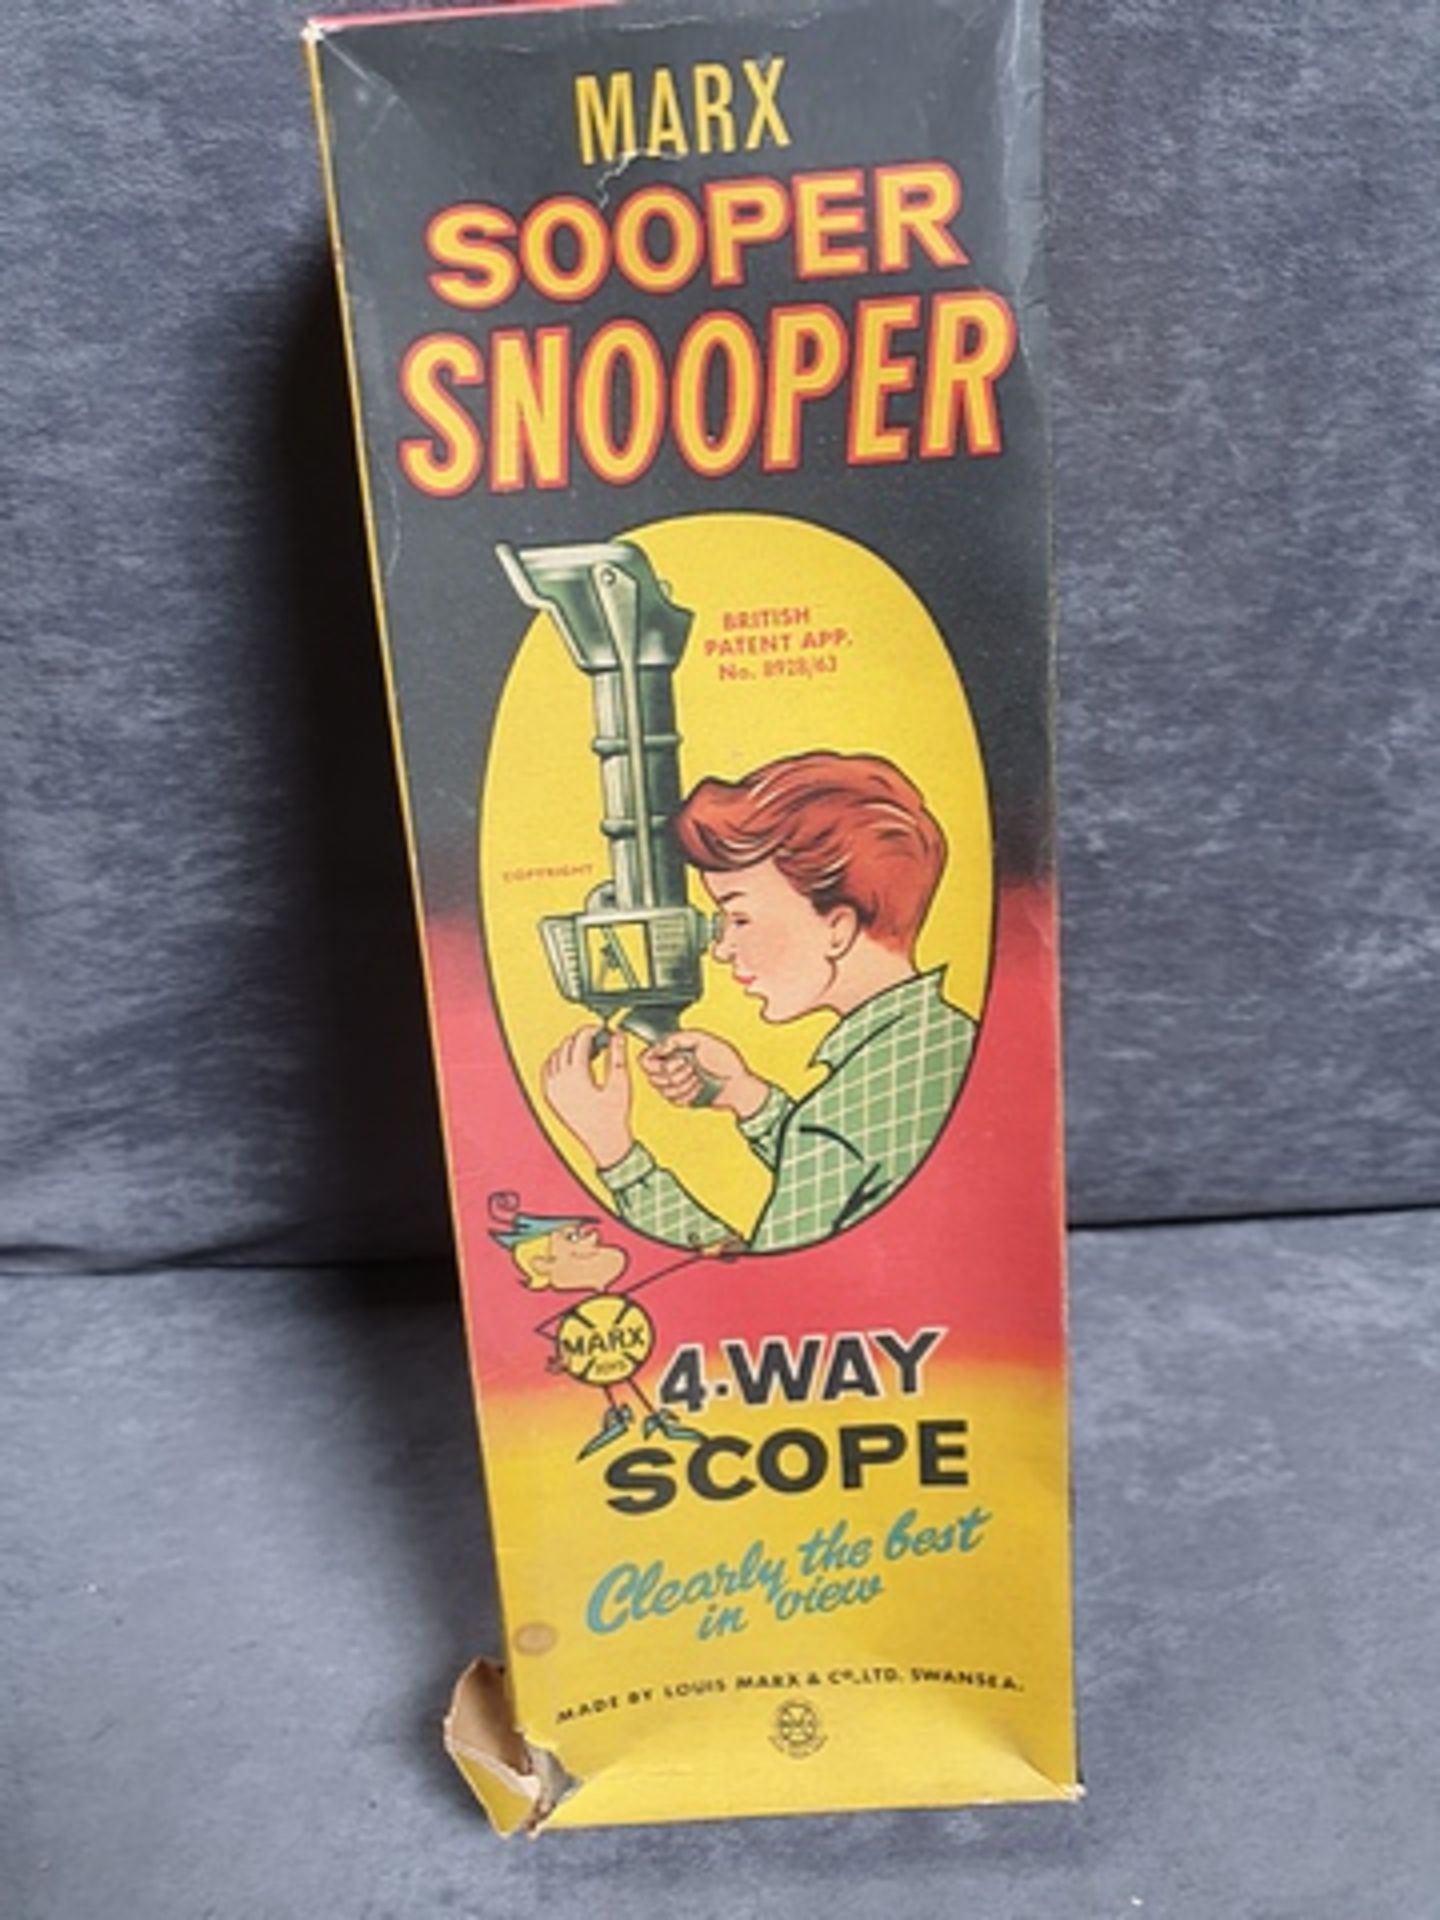 Marx Sooper Snooper With 4 Way Scope Complete With Box - Image 2 of 2